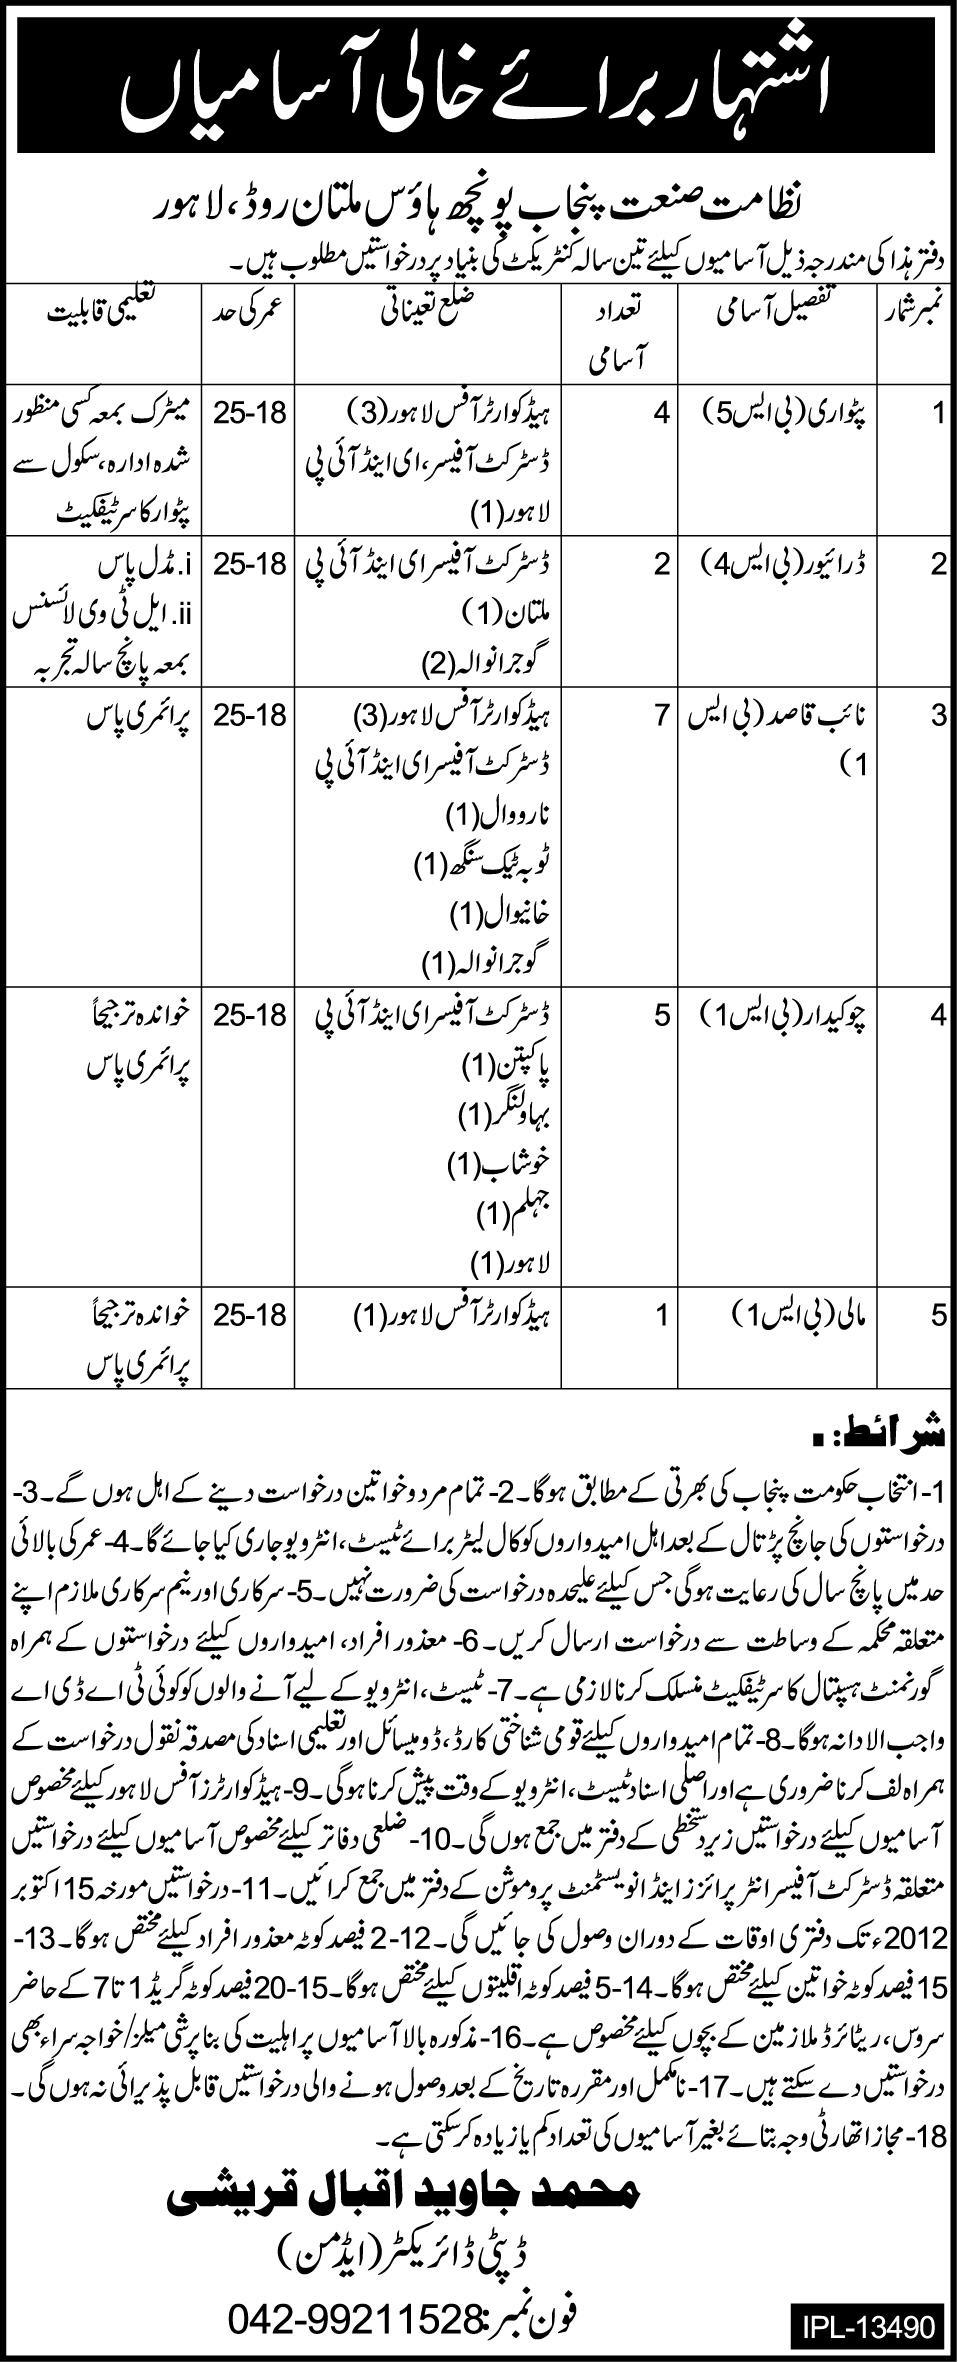 Directorate of Industries Punjab Poonch House Lahore Jobs (Government Jobs)